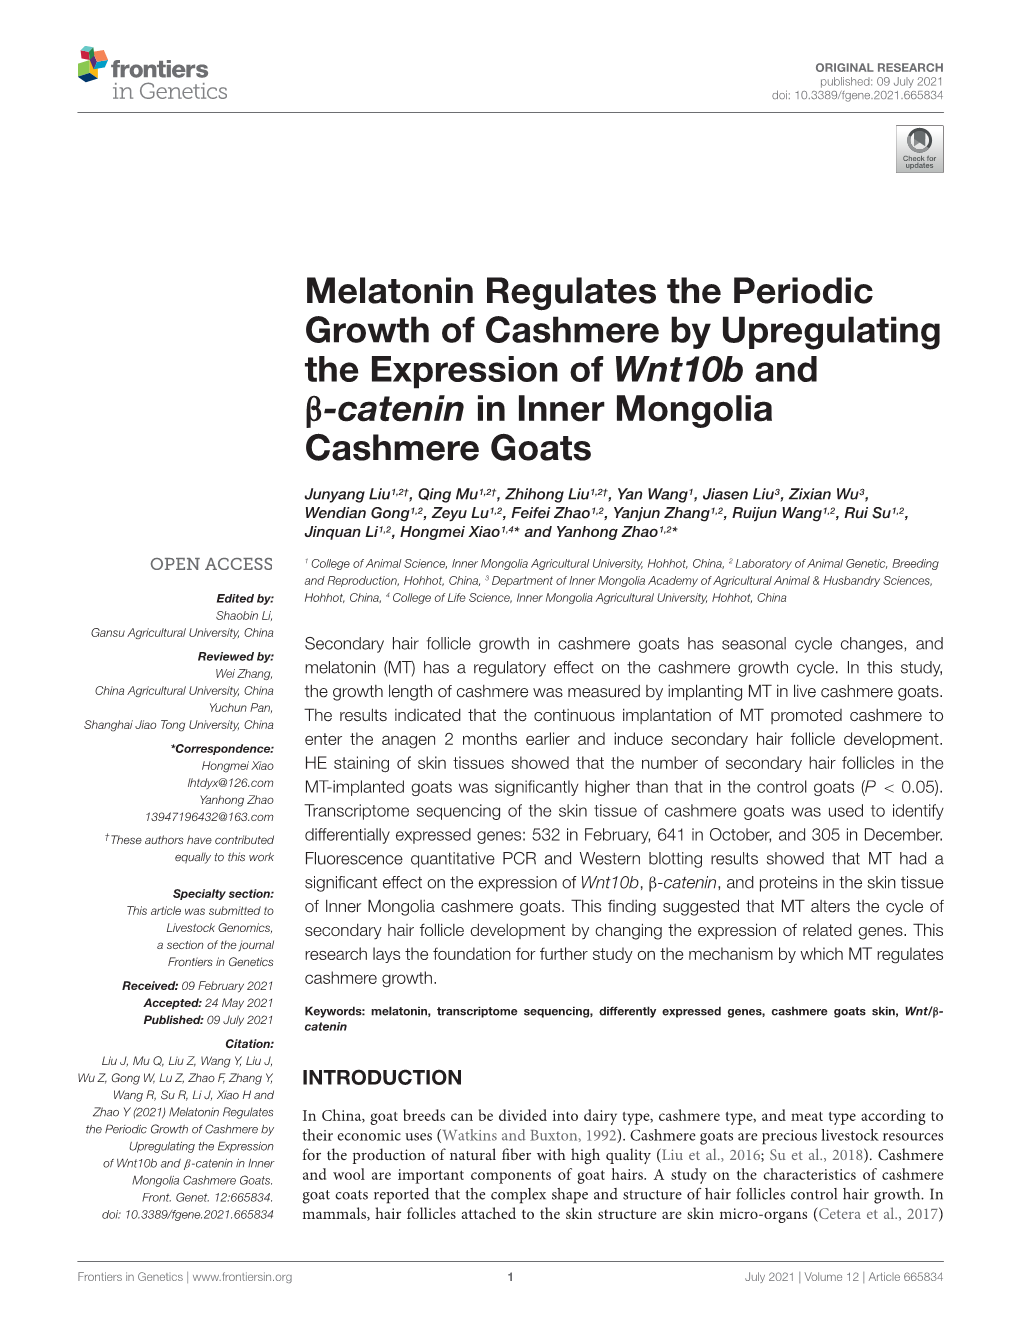 Melatonin Regulates the Periodic Growth of Cashmere by Upregulating the Expression of Wnt10b and Β-Catenin in Inner Mongolia Cashmere Goats